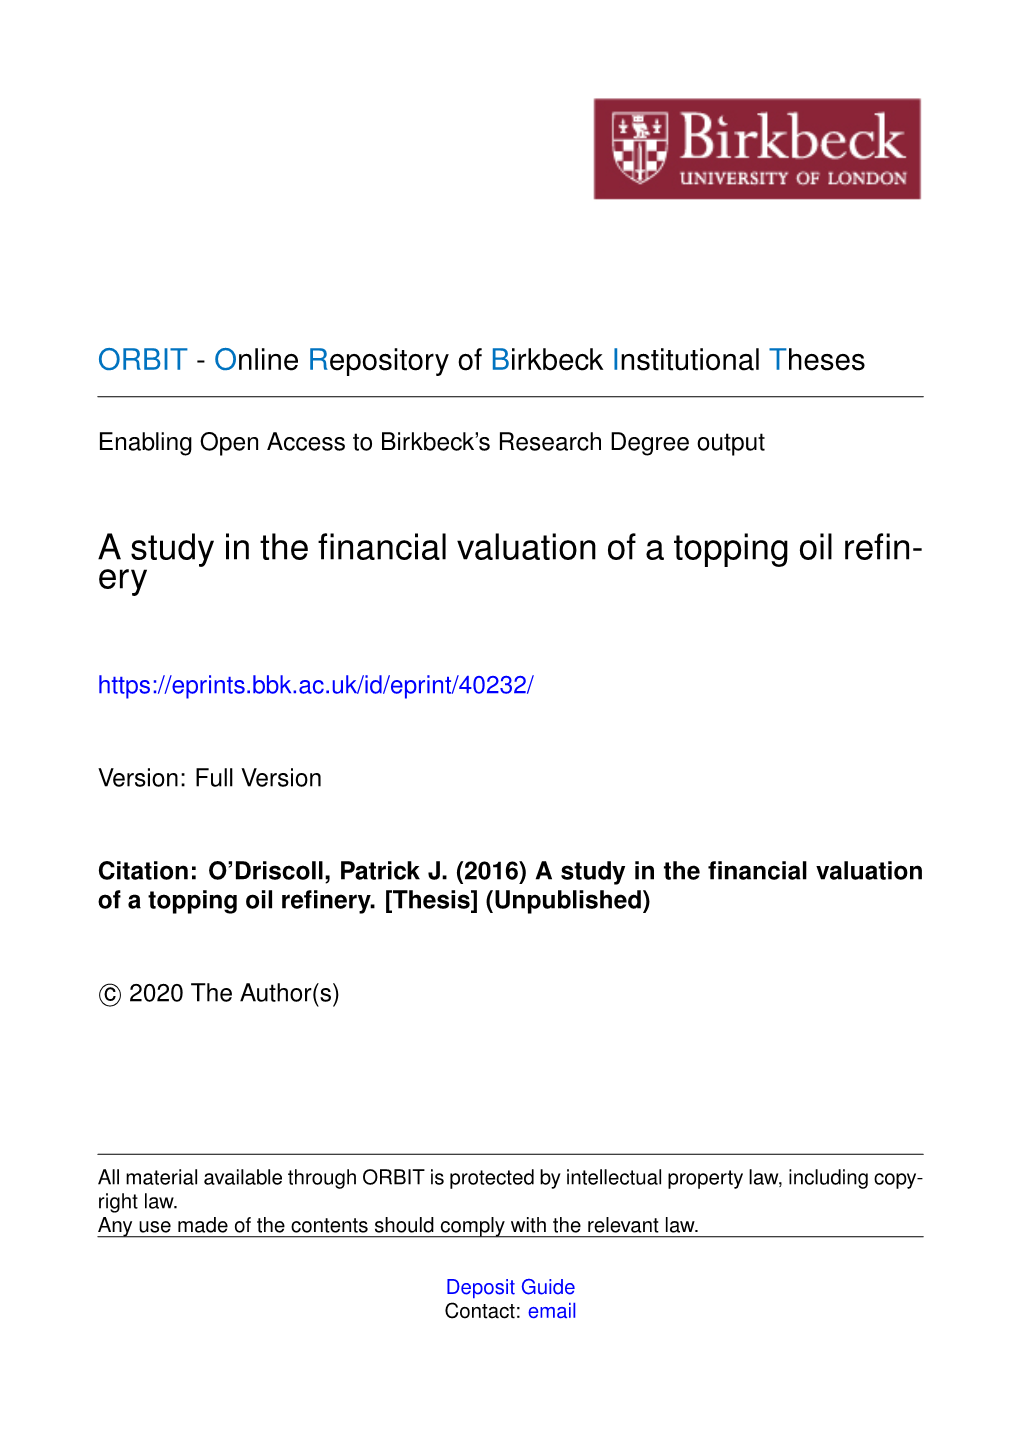 A Study in the Financial Valuation of a Topping Oil Refin